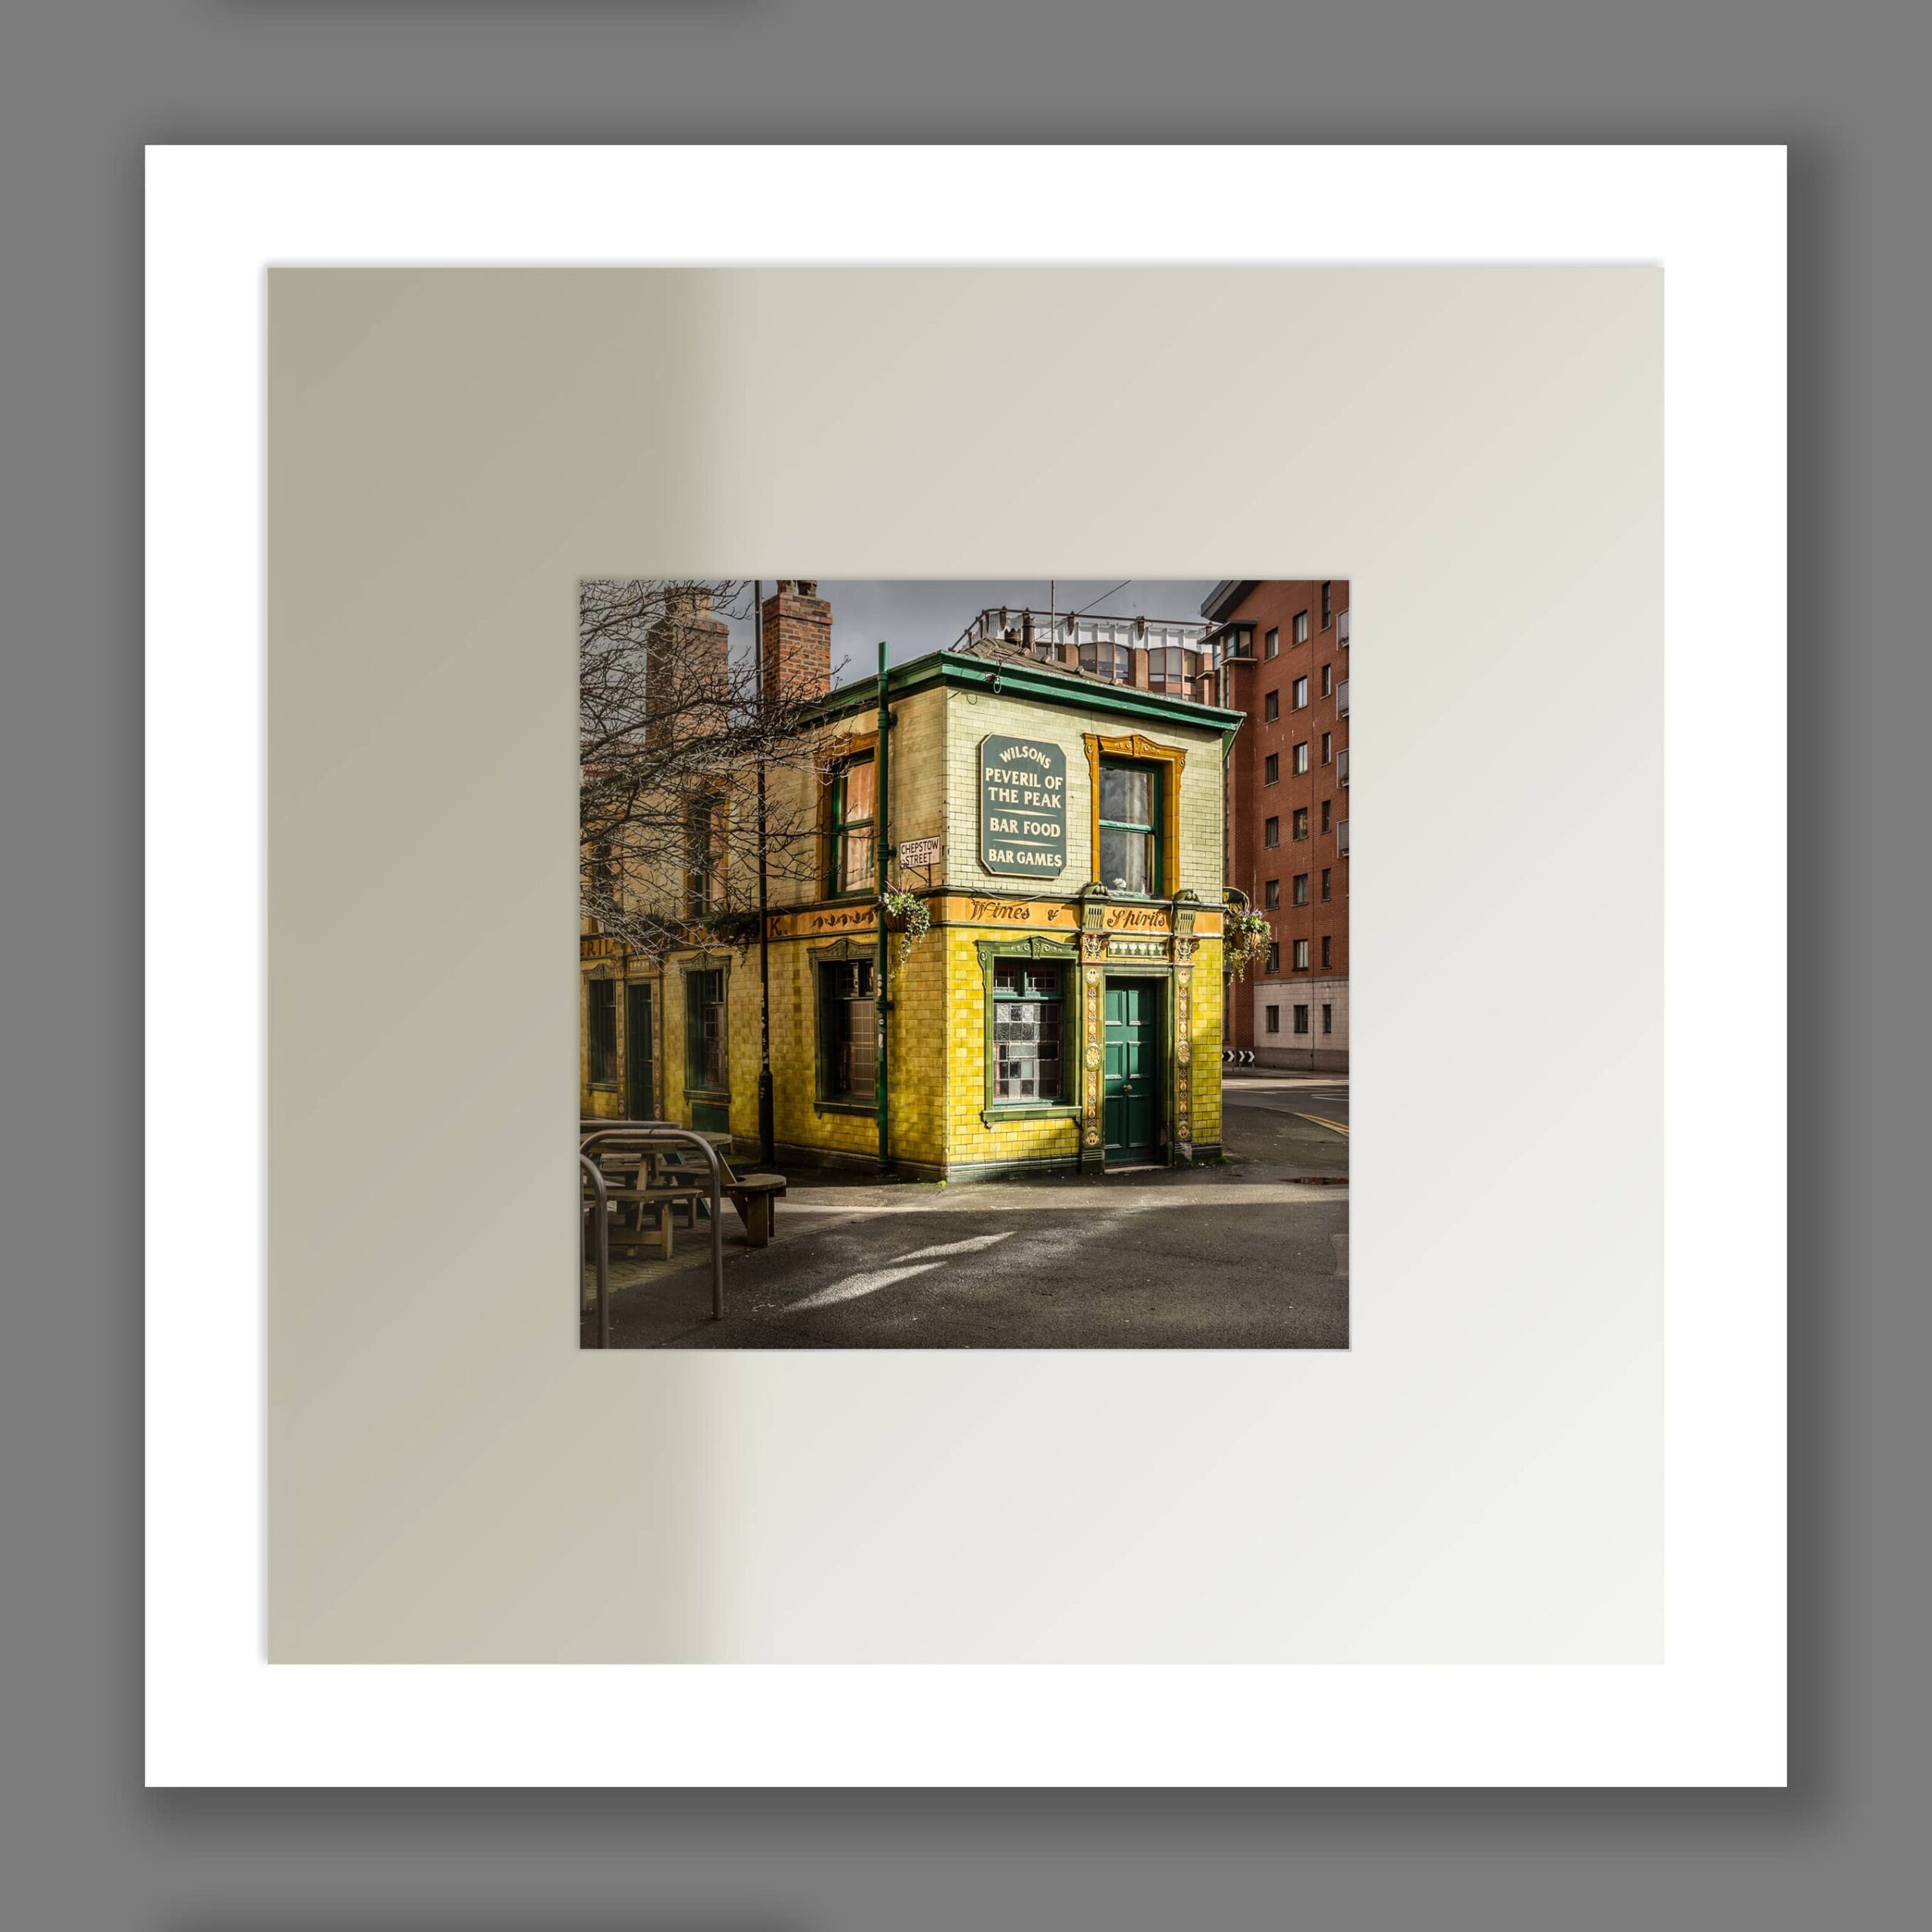 Colour Photo of Peveril of the Peak Public House | Micro Manchester Series Micro Manchester colour